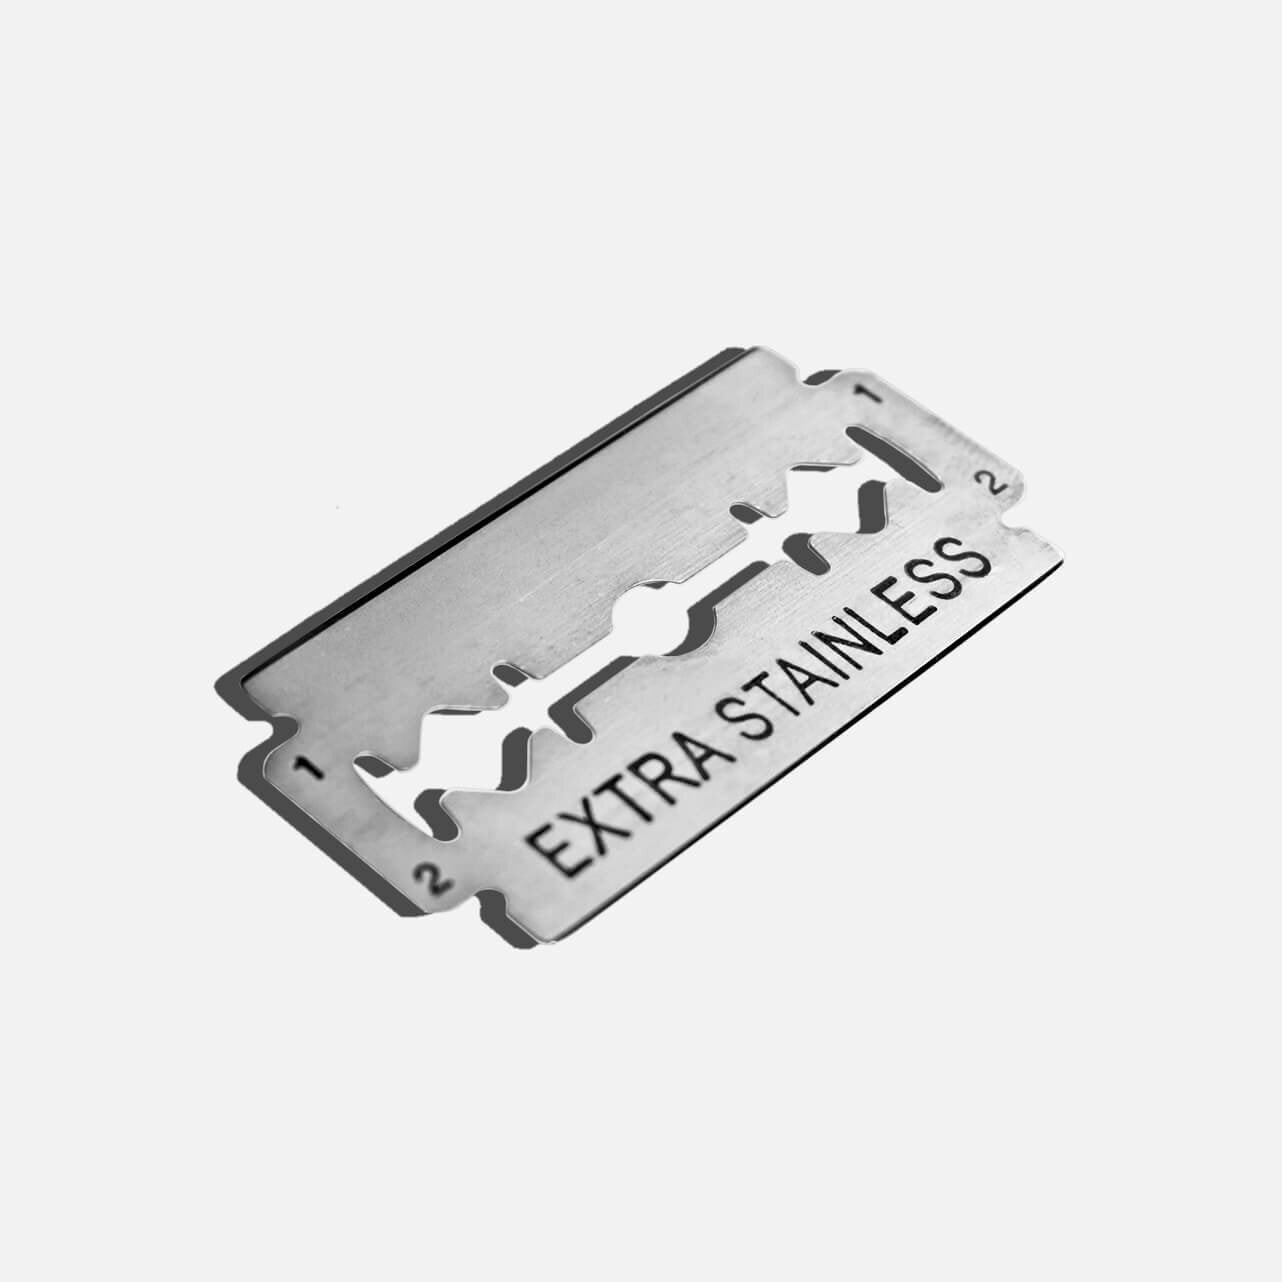 Stainless steel double edge safety razor blades that are compatible with all standard double edge razors | Plastic Free, Low Waste